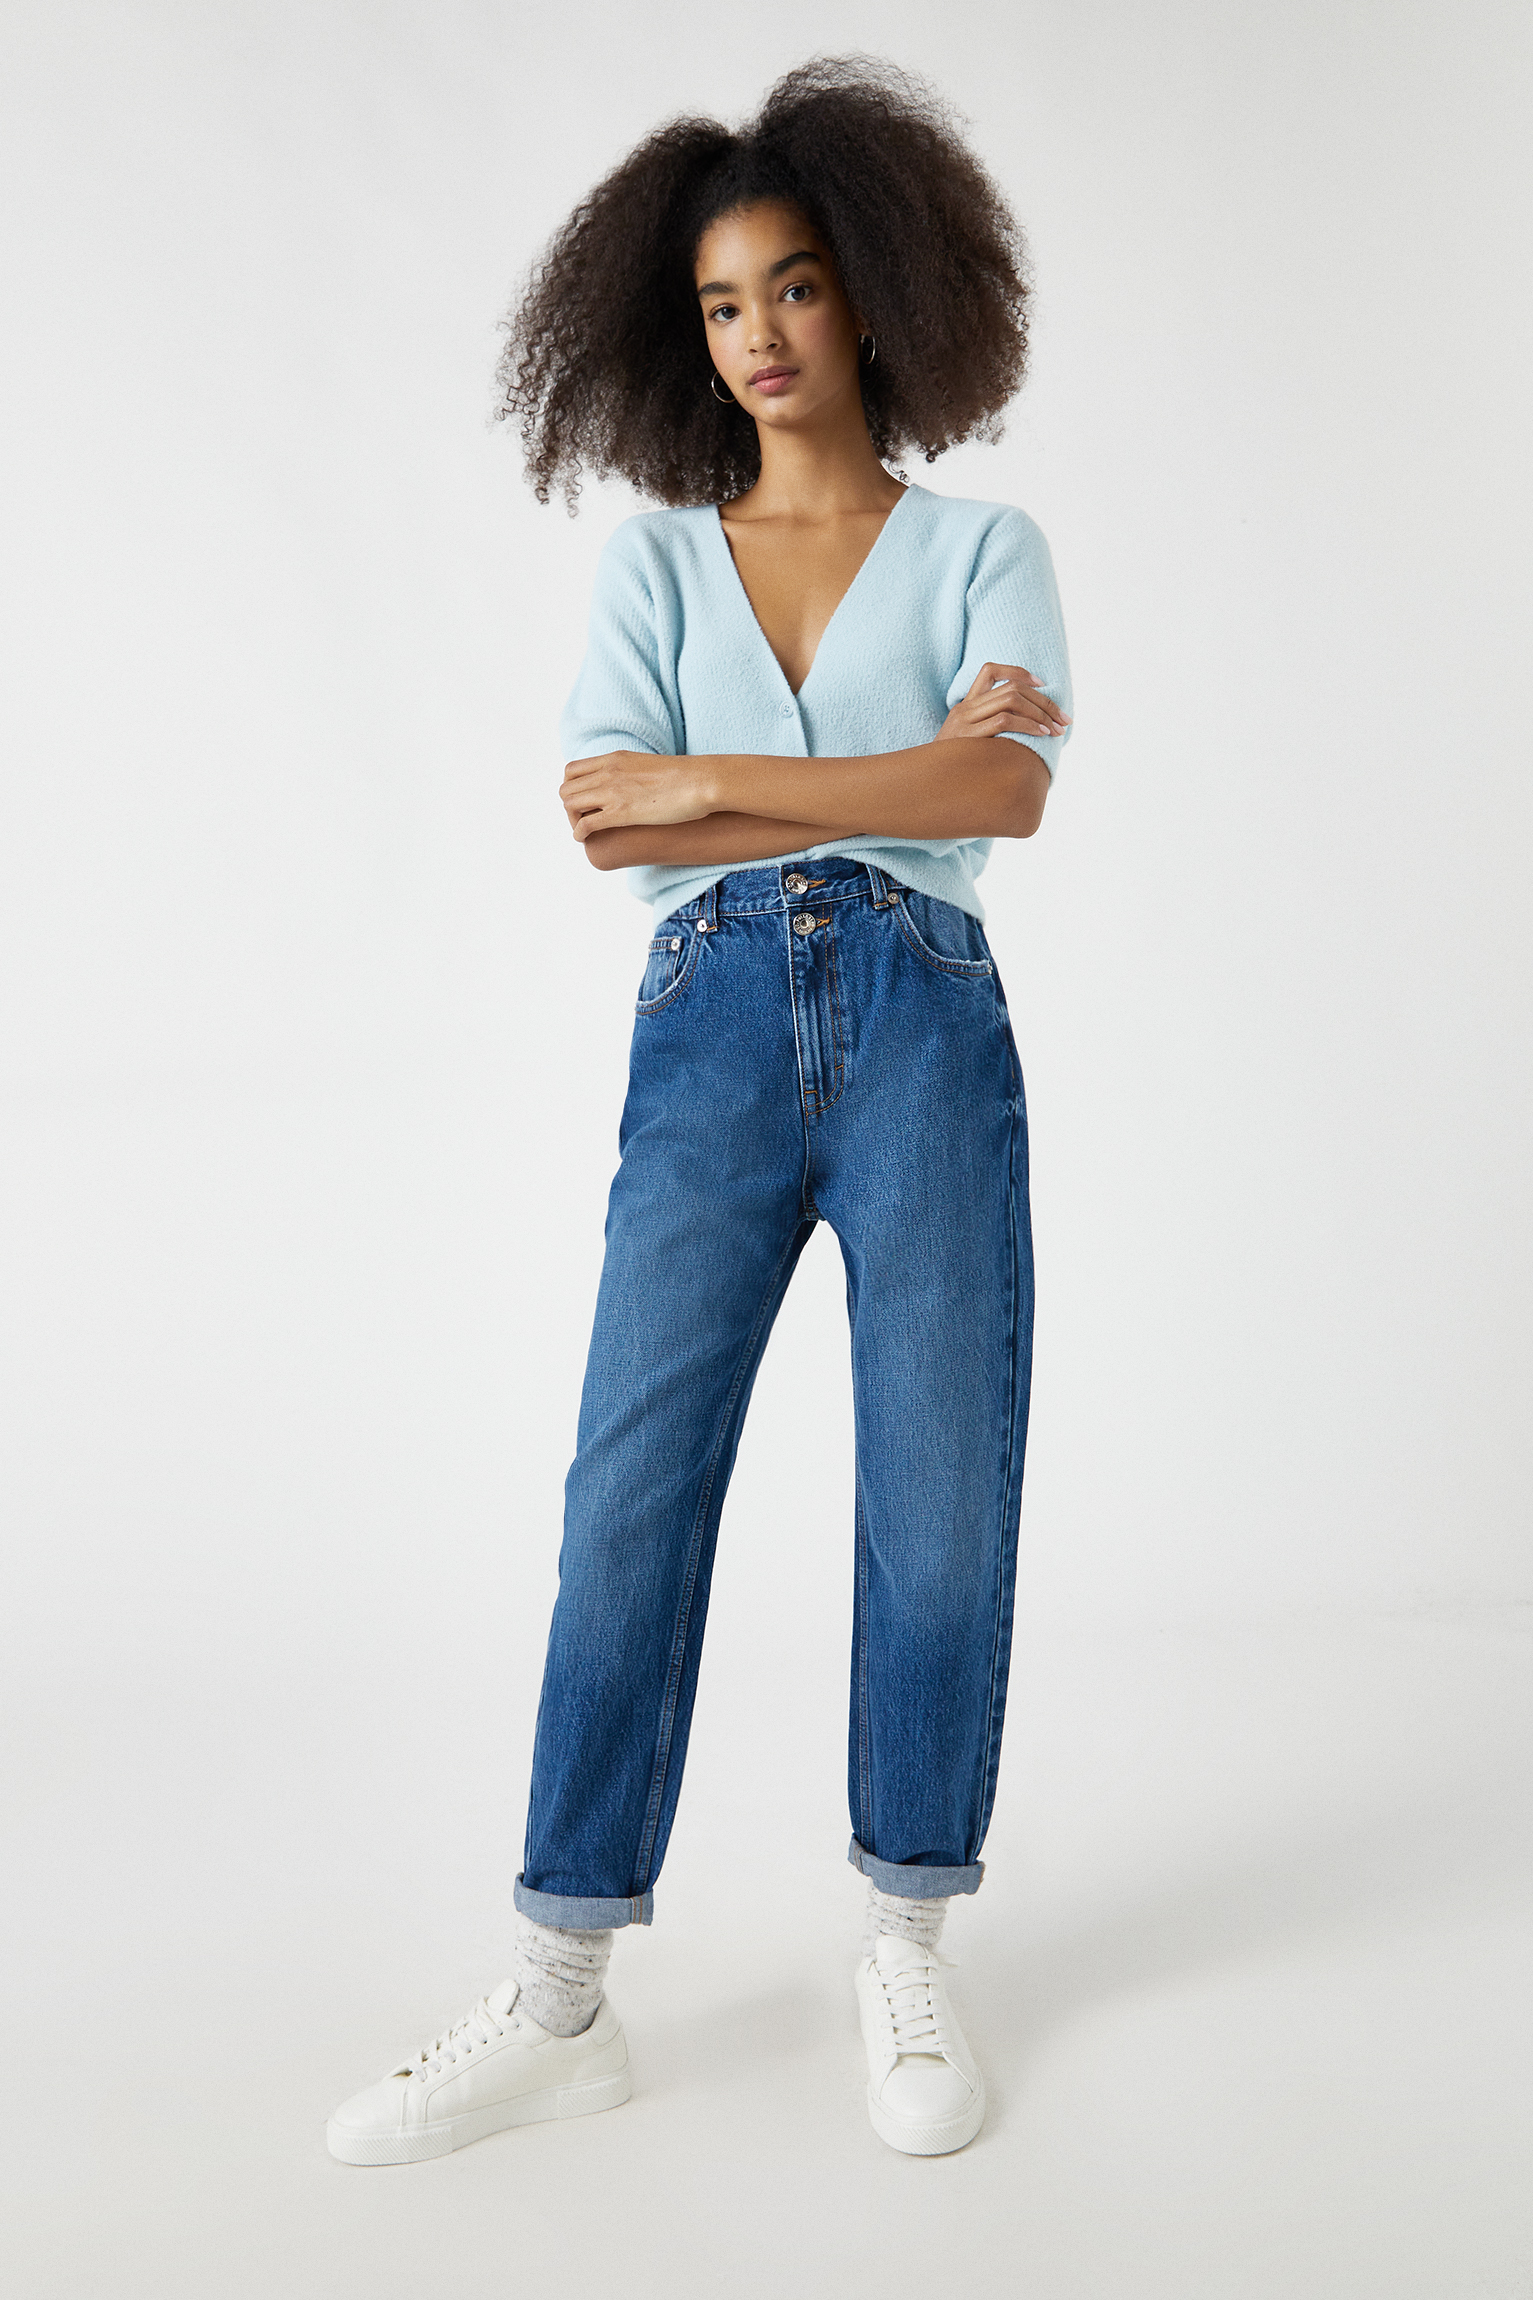 blue jeans with stretch waistband